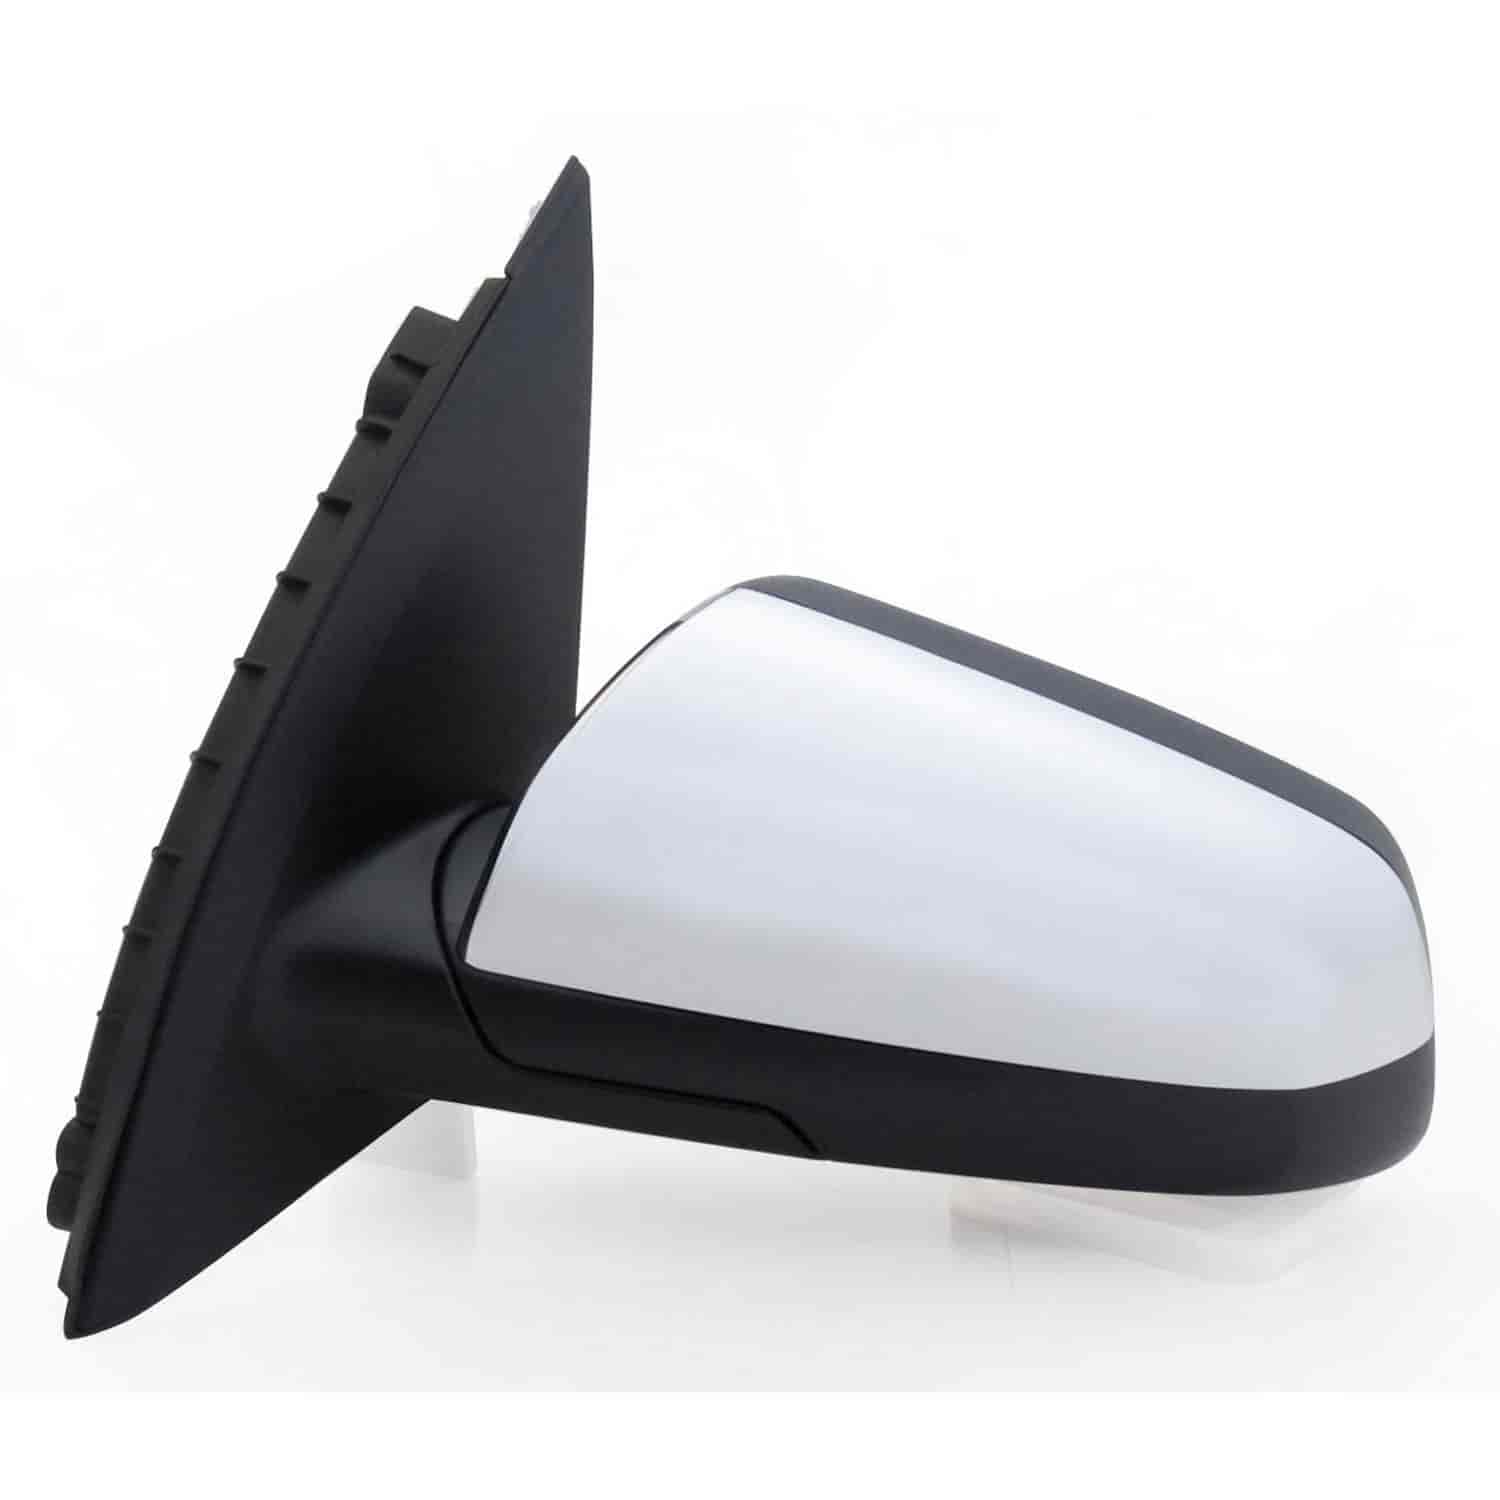 OEM Style Replacement mirror for 08-09 Pontiac G8 driver side mirror tested to fit and function like